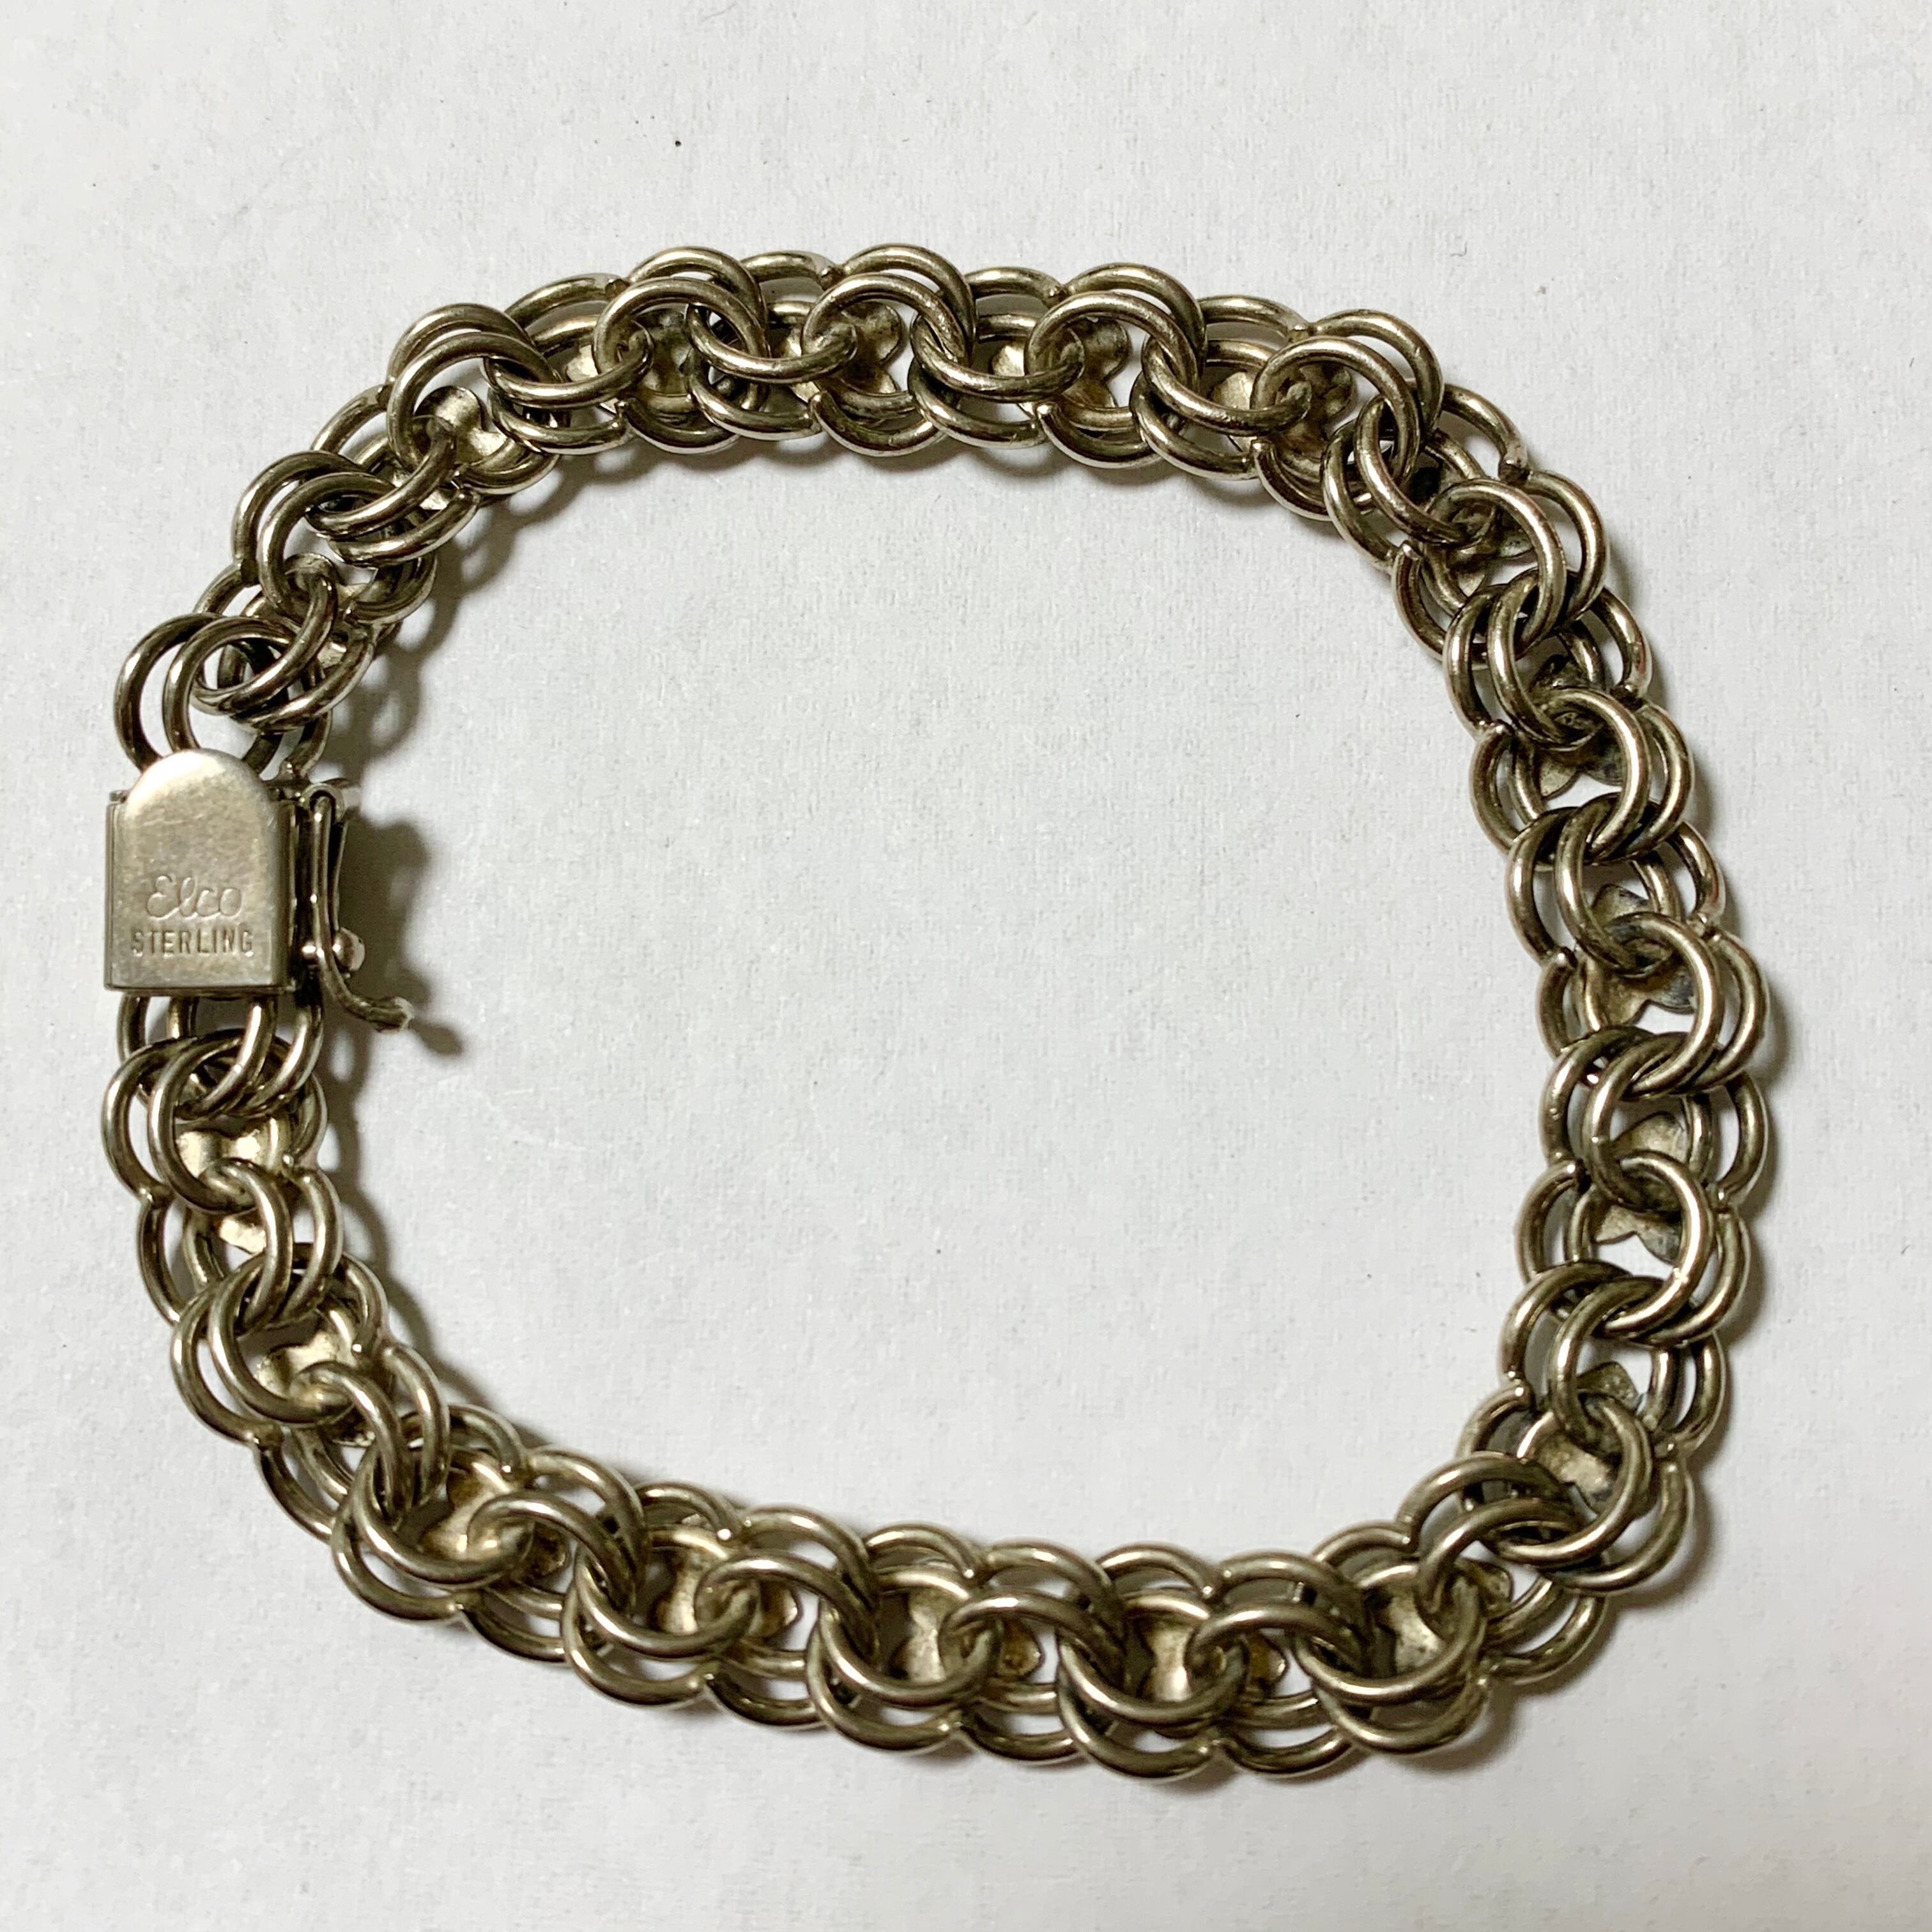 ELCO STERLING SILVER DOUBLE LINK ブレスレット